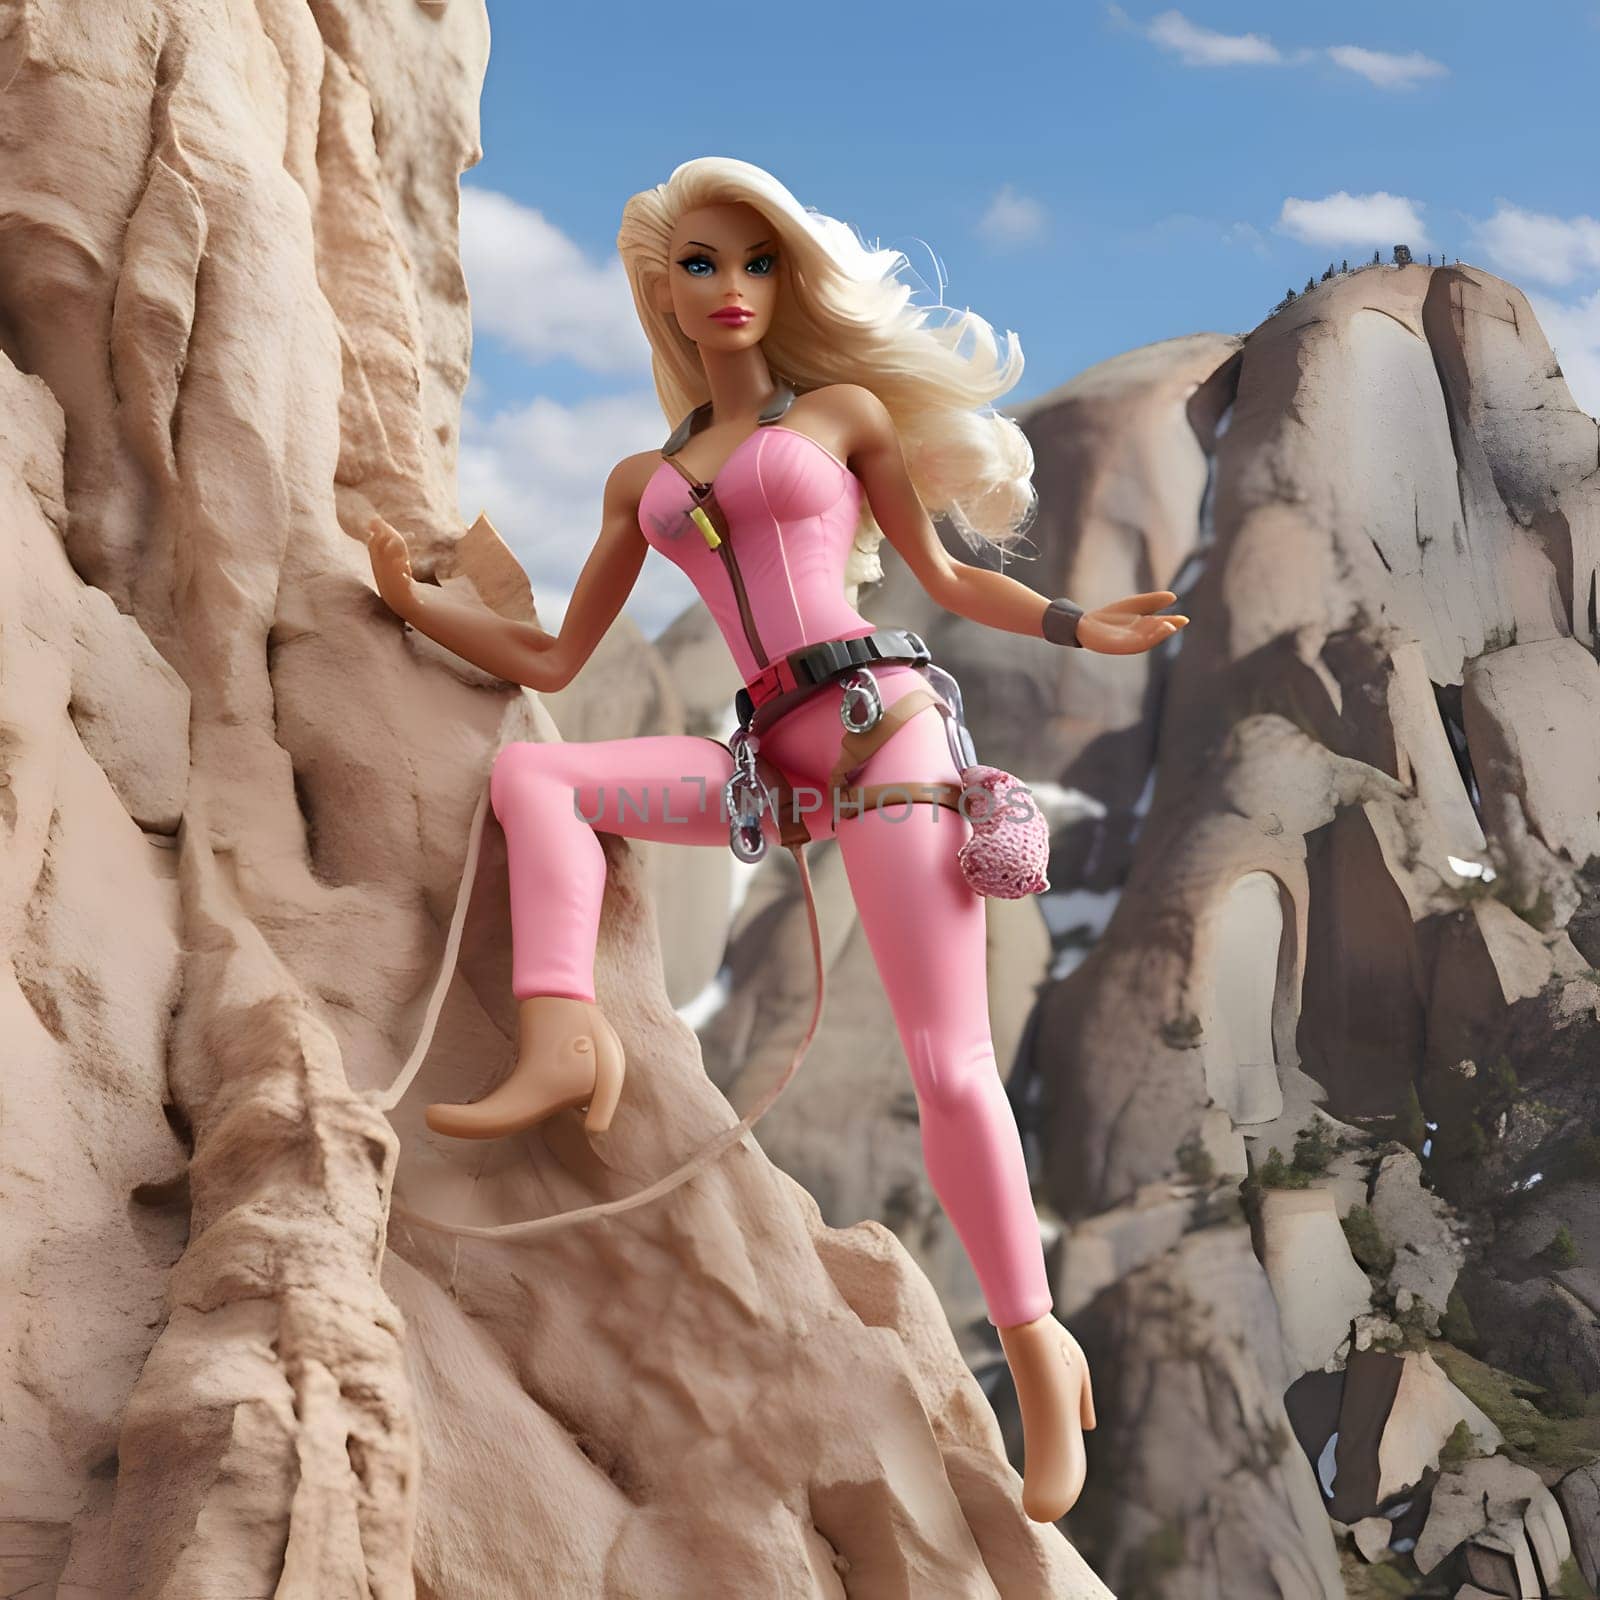 Cute blonde Barbie, dressed in a pink outfit, fearlessly climbs the mountains, surrounded by a breathtaking view of the majestic peaks in the background.